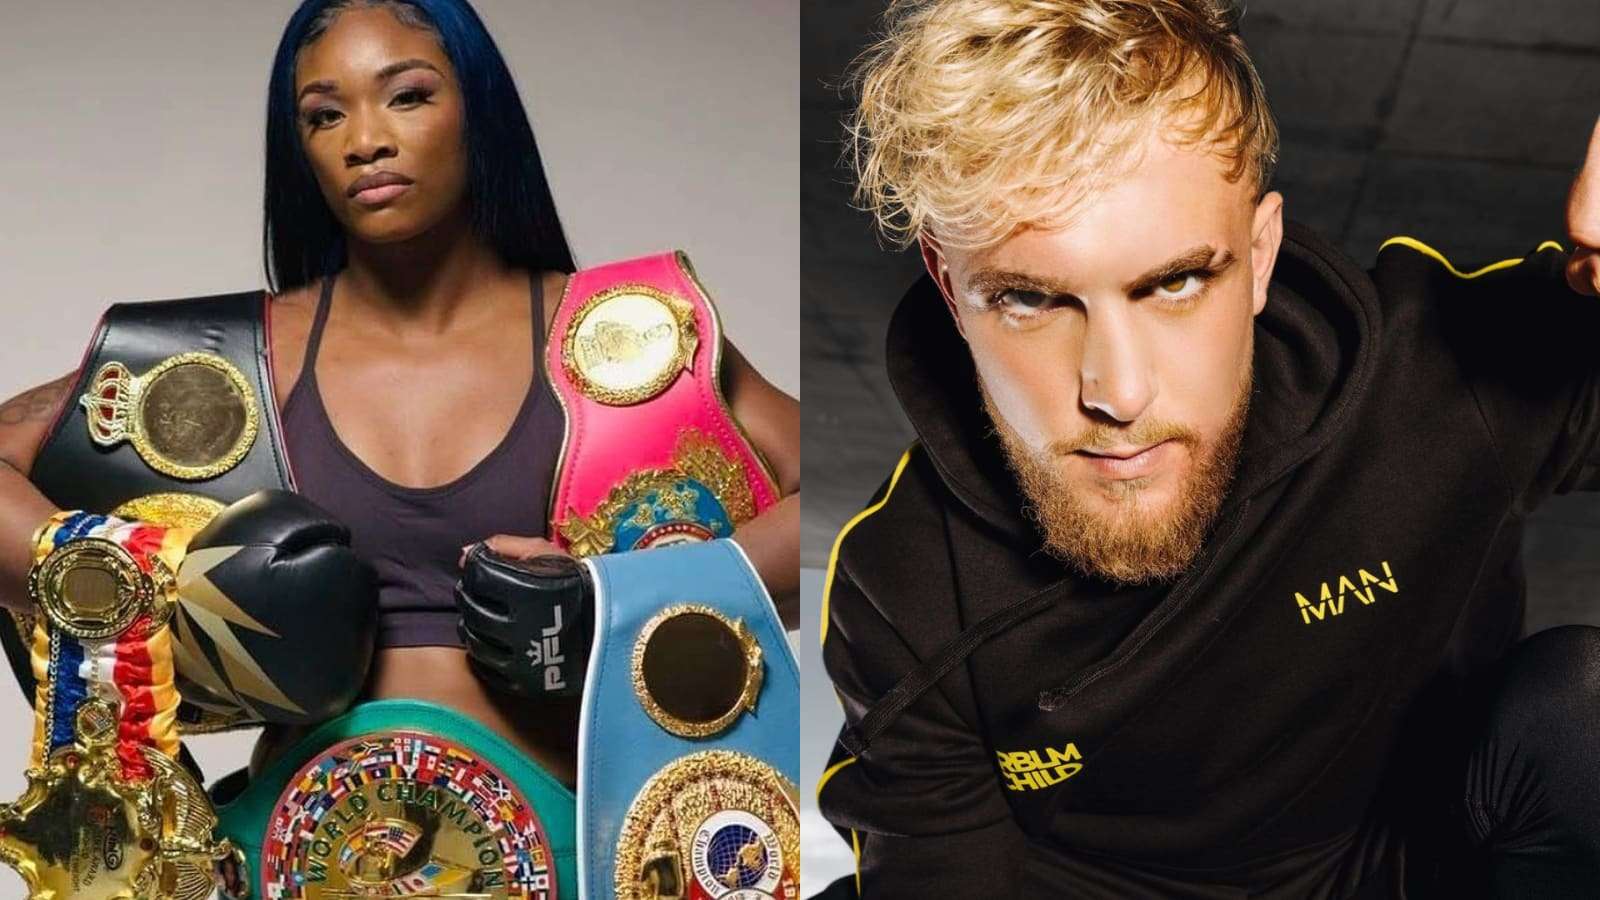 Claressa Shields challenges Jake Paul to fight